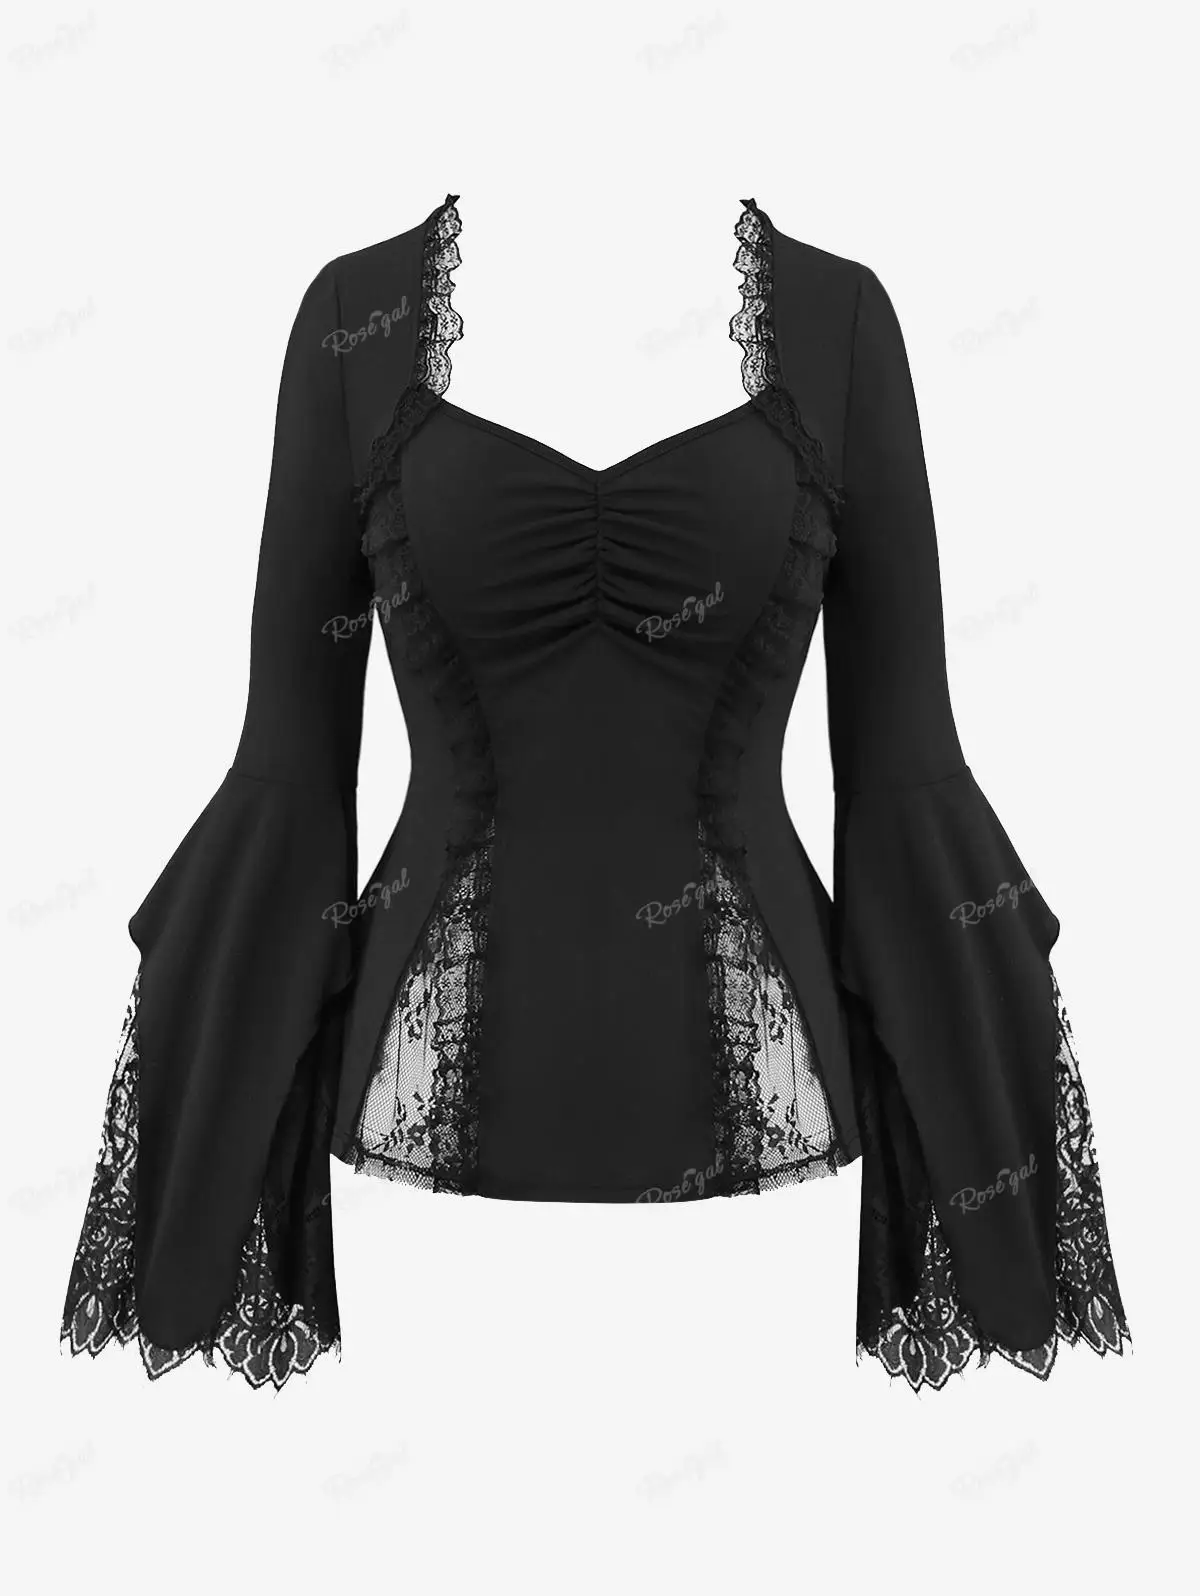 

ROSEGAL New Gothic Floral Lace Panel T-shirt Black Sweetheart Neck Cinched Lace-trim Flare Sleeves Tops For Women Streetwear Tee